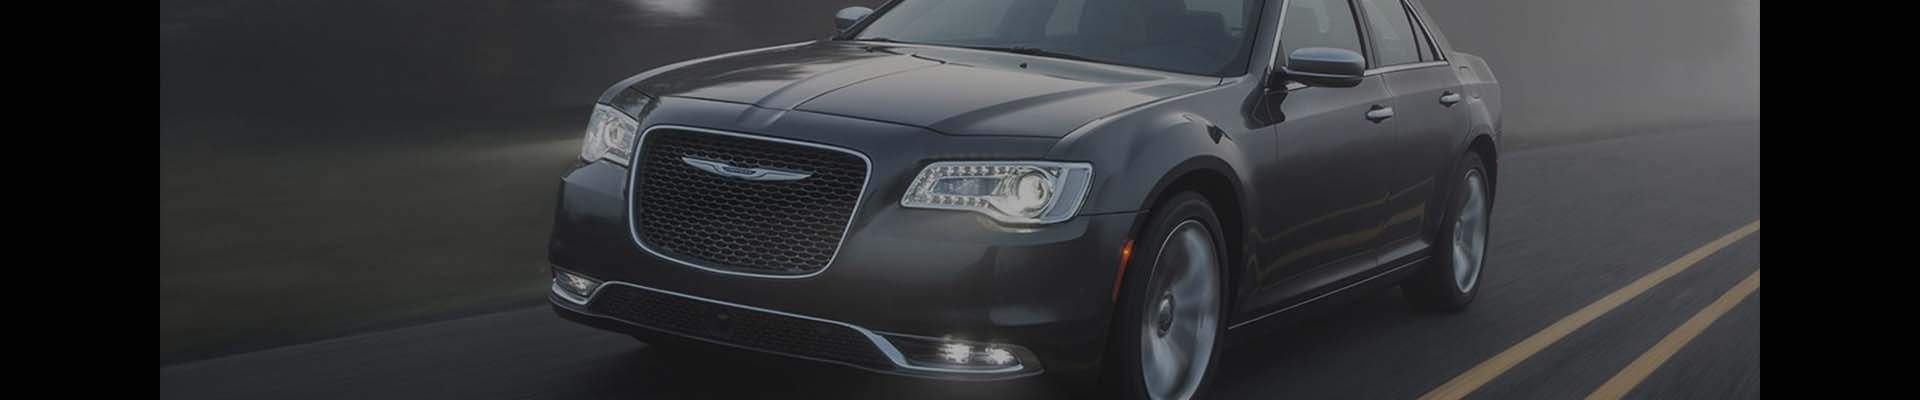 Shop Genuine OE Parts for Chrysler